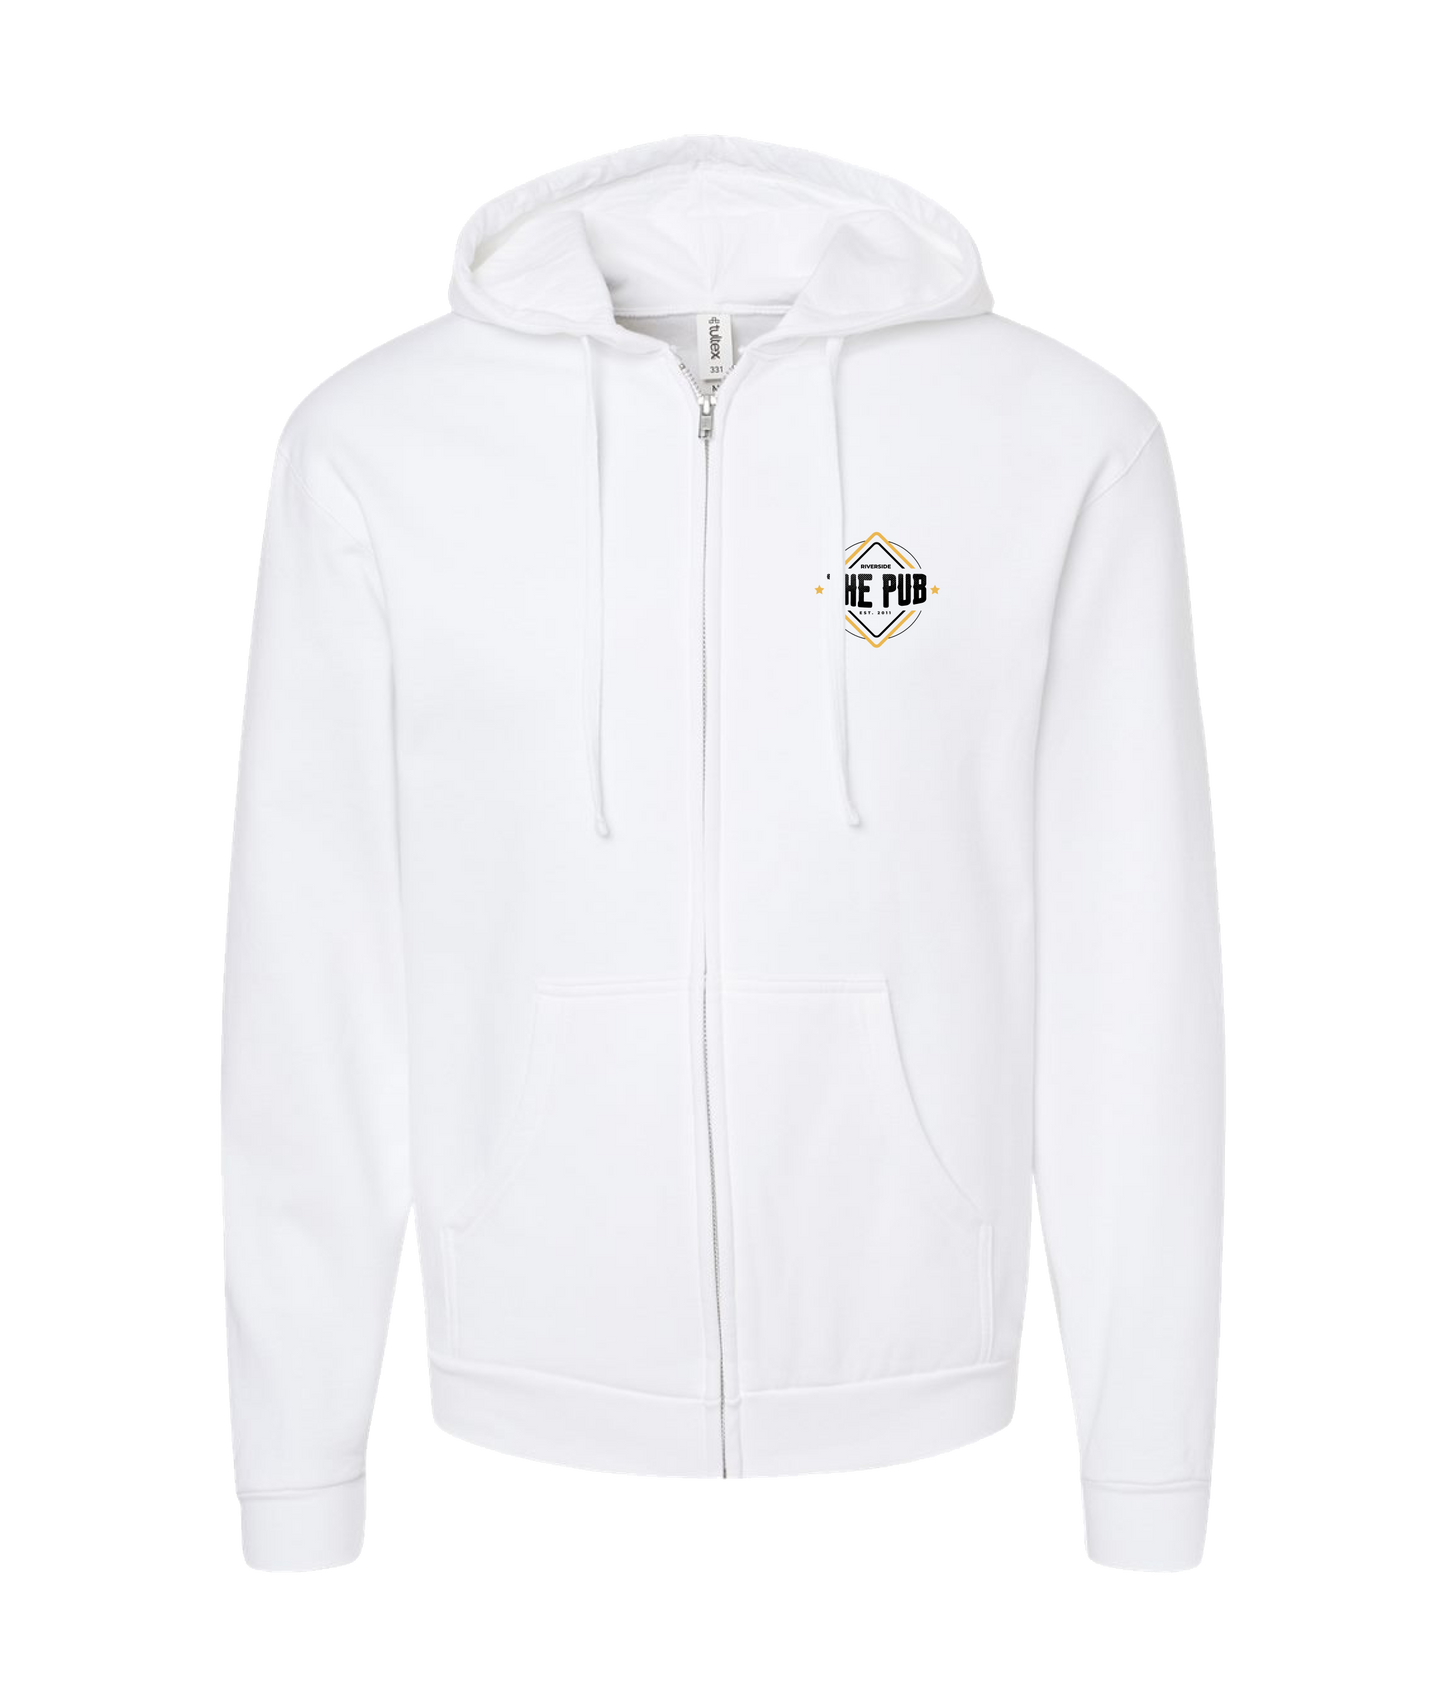 Riverside Pub and Grill - The Pub - White Zip Up Hoodie